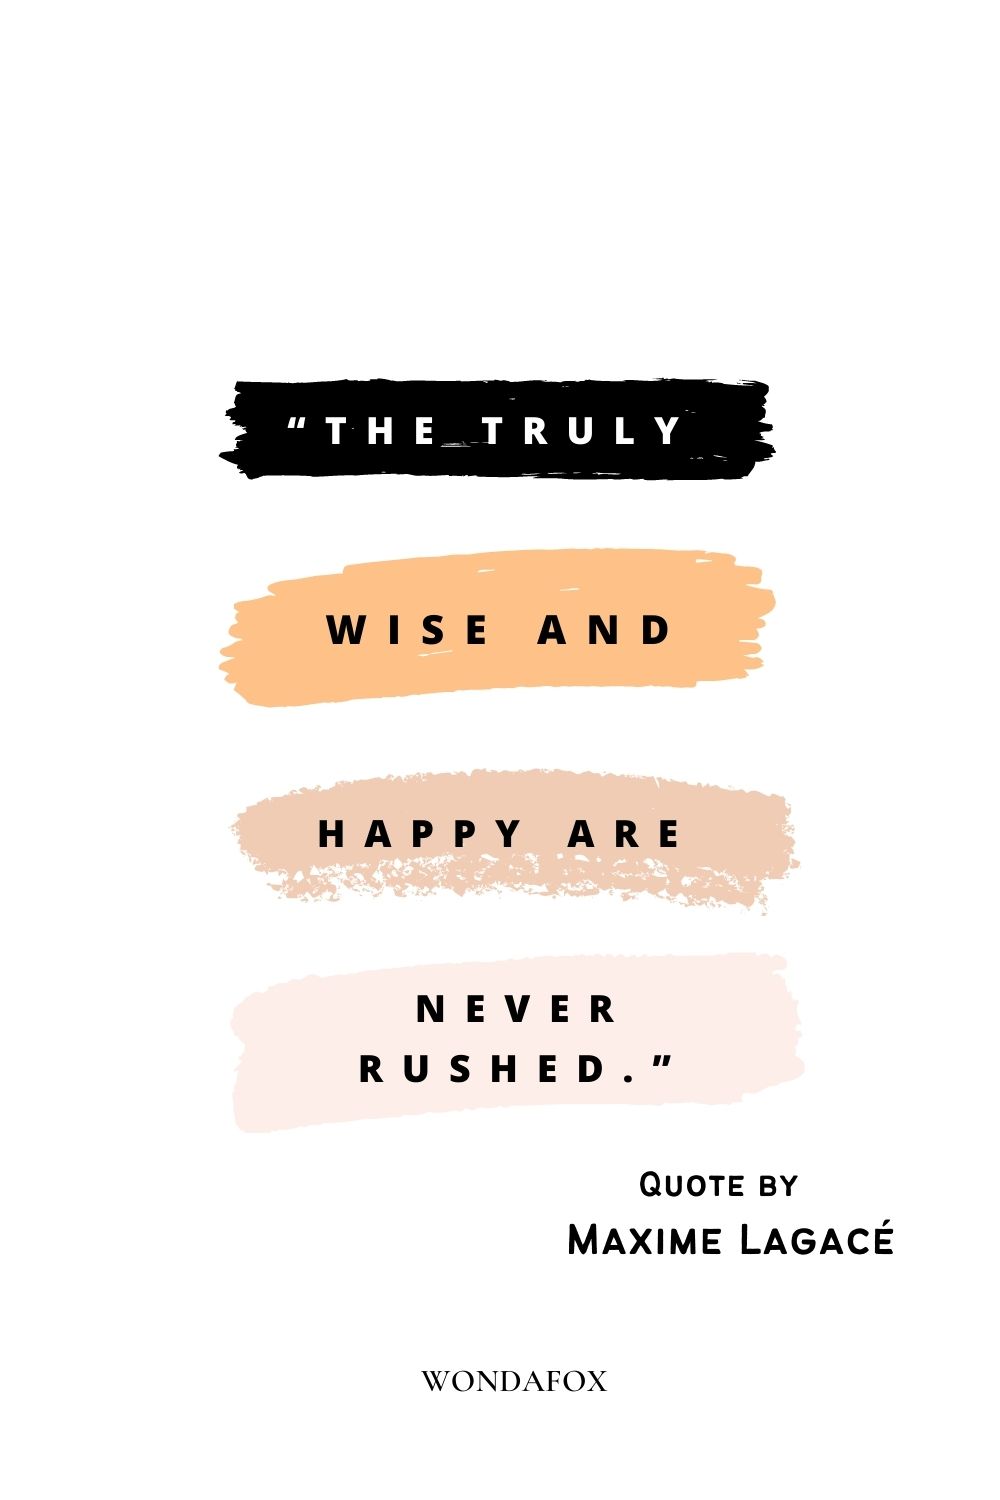 “The truly wise and happy are never rushed.”
Maxime Lagacé